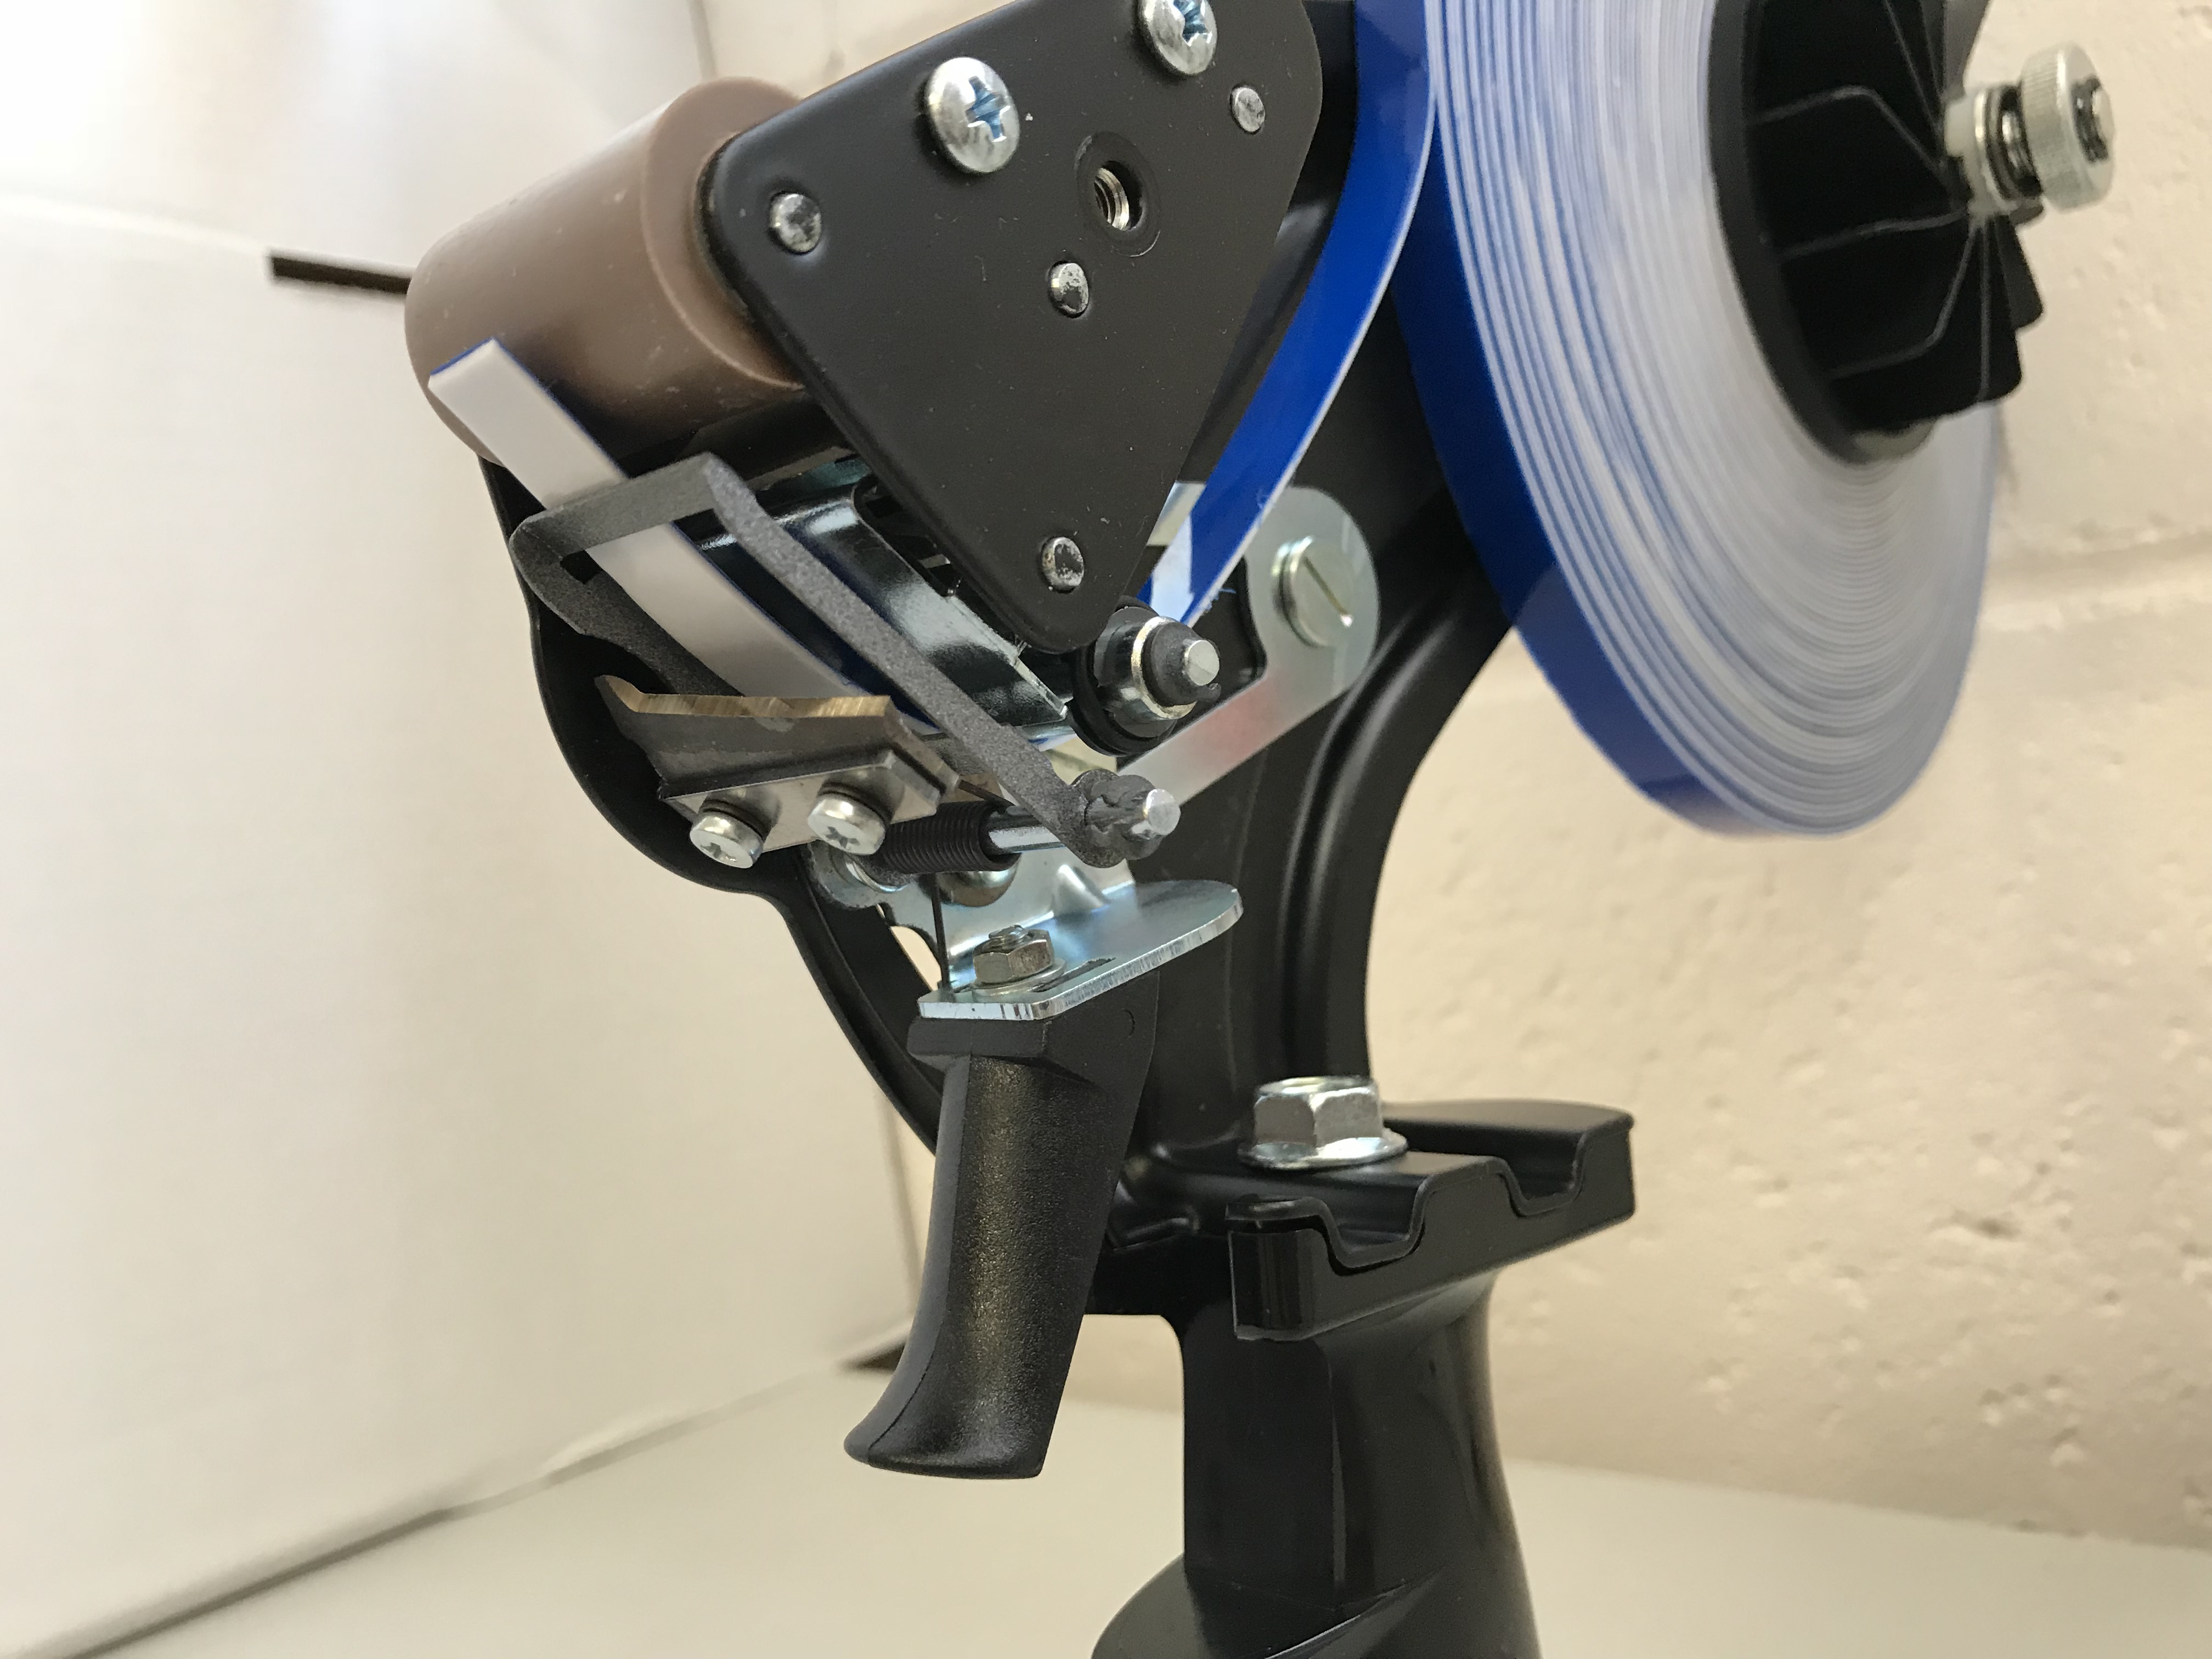 double sided tape dispenser machine